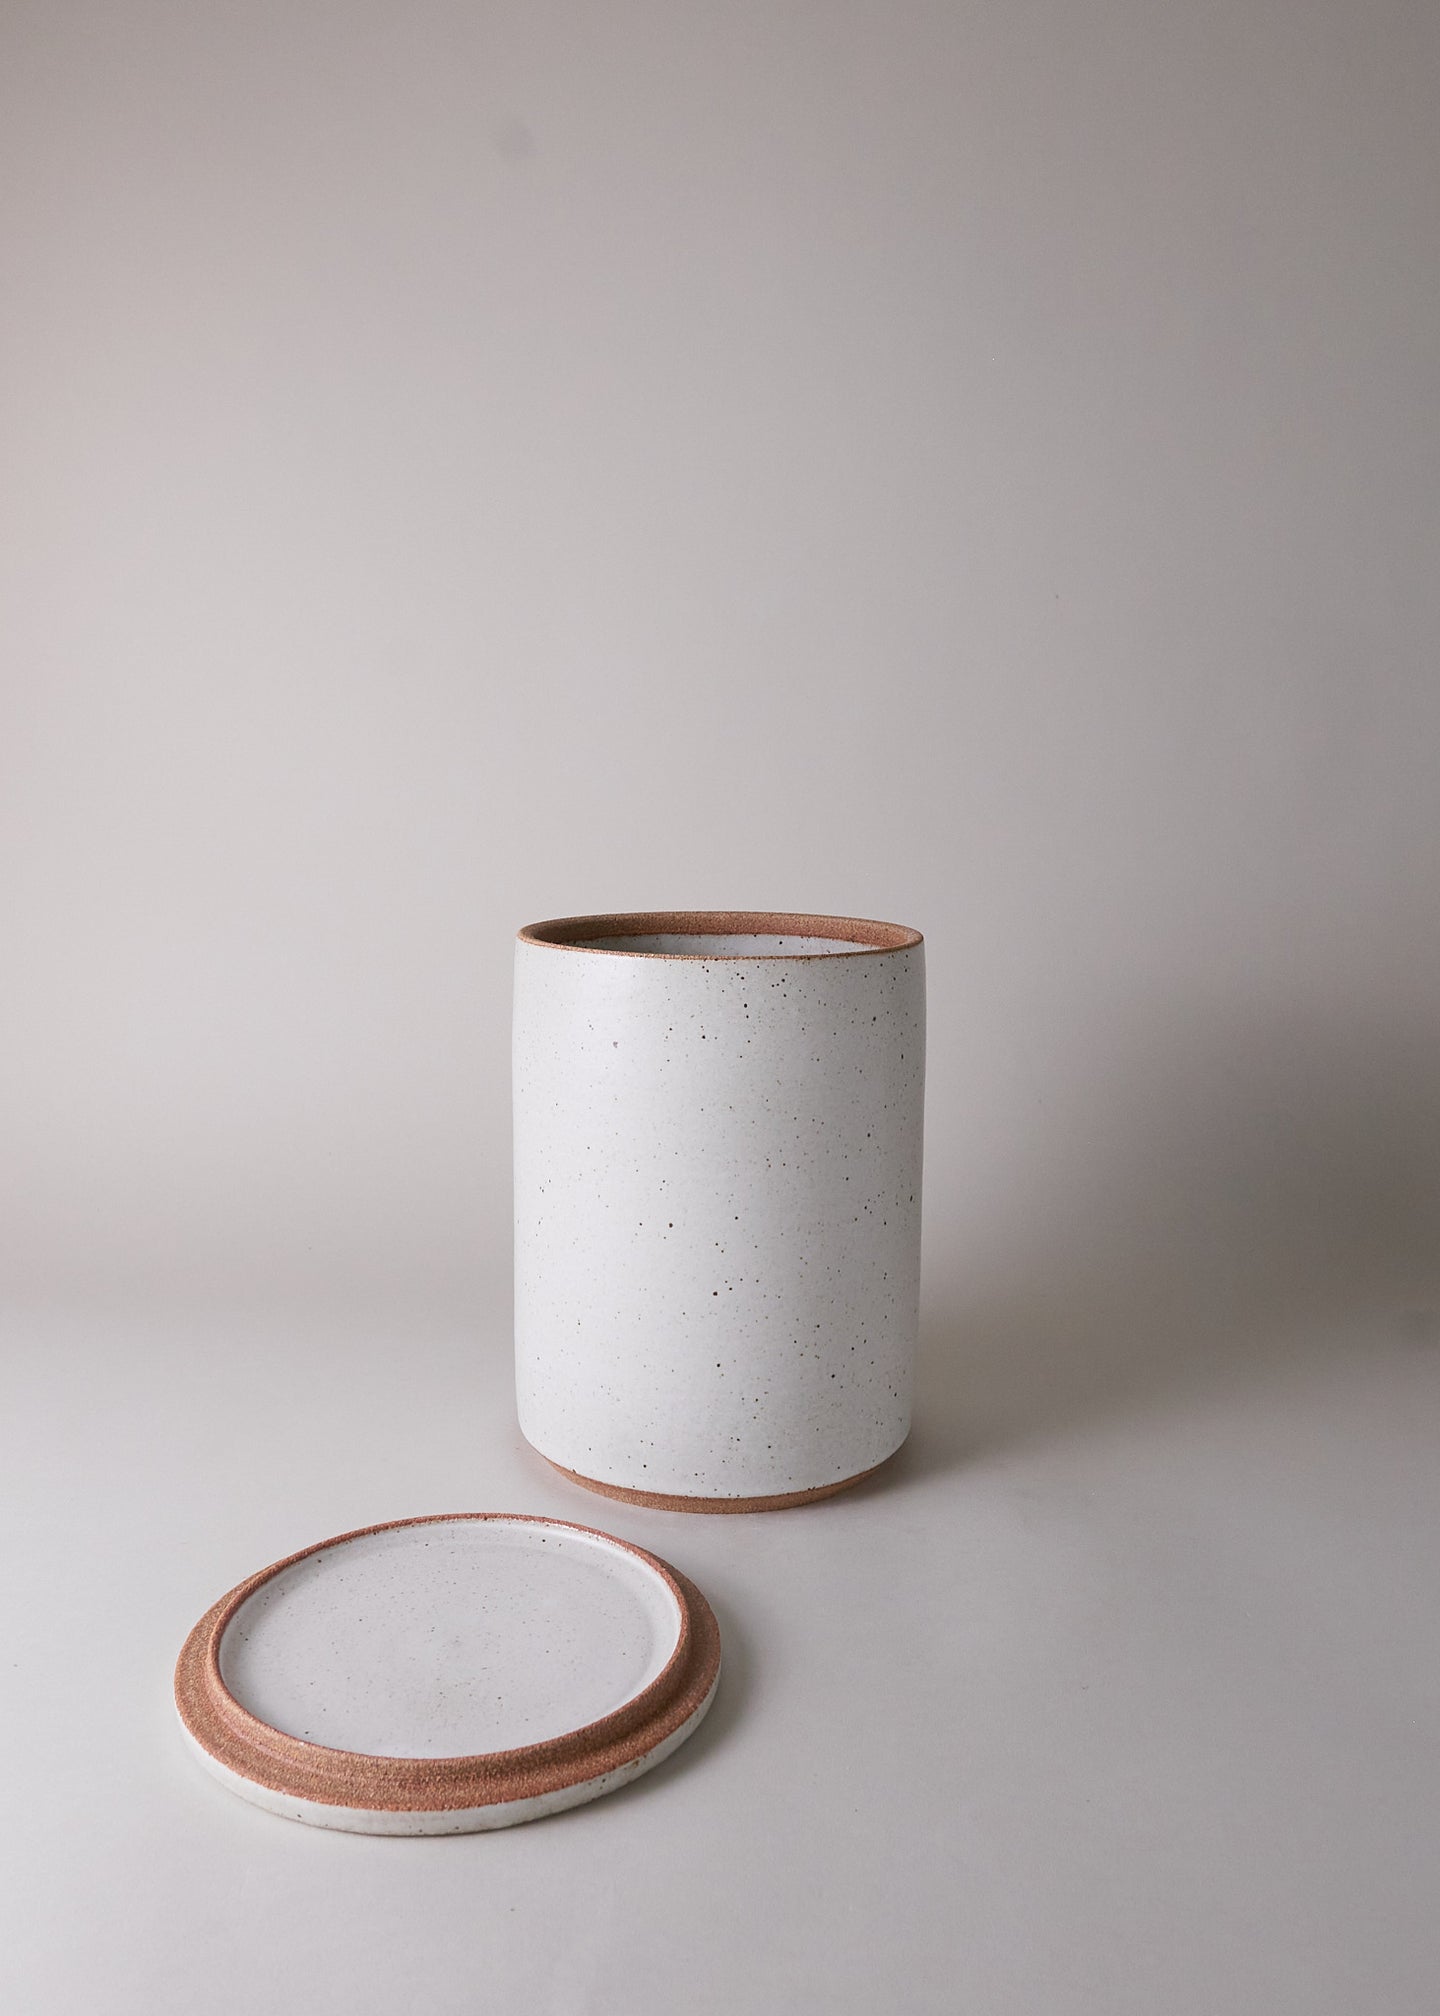 Large Canister in Flecked Ivory - Victoria Morris Pottery